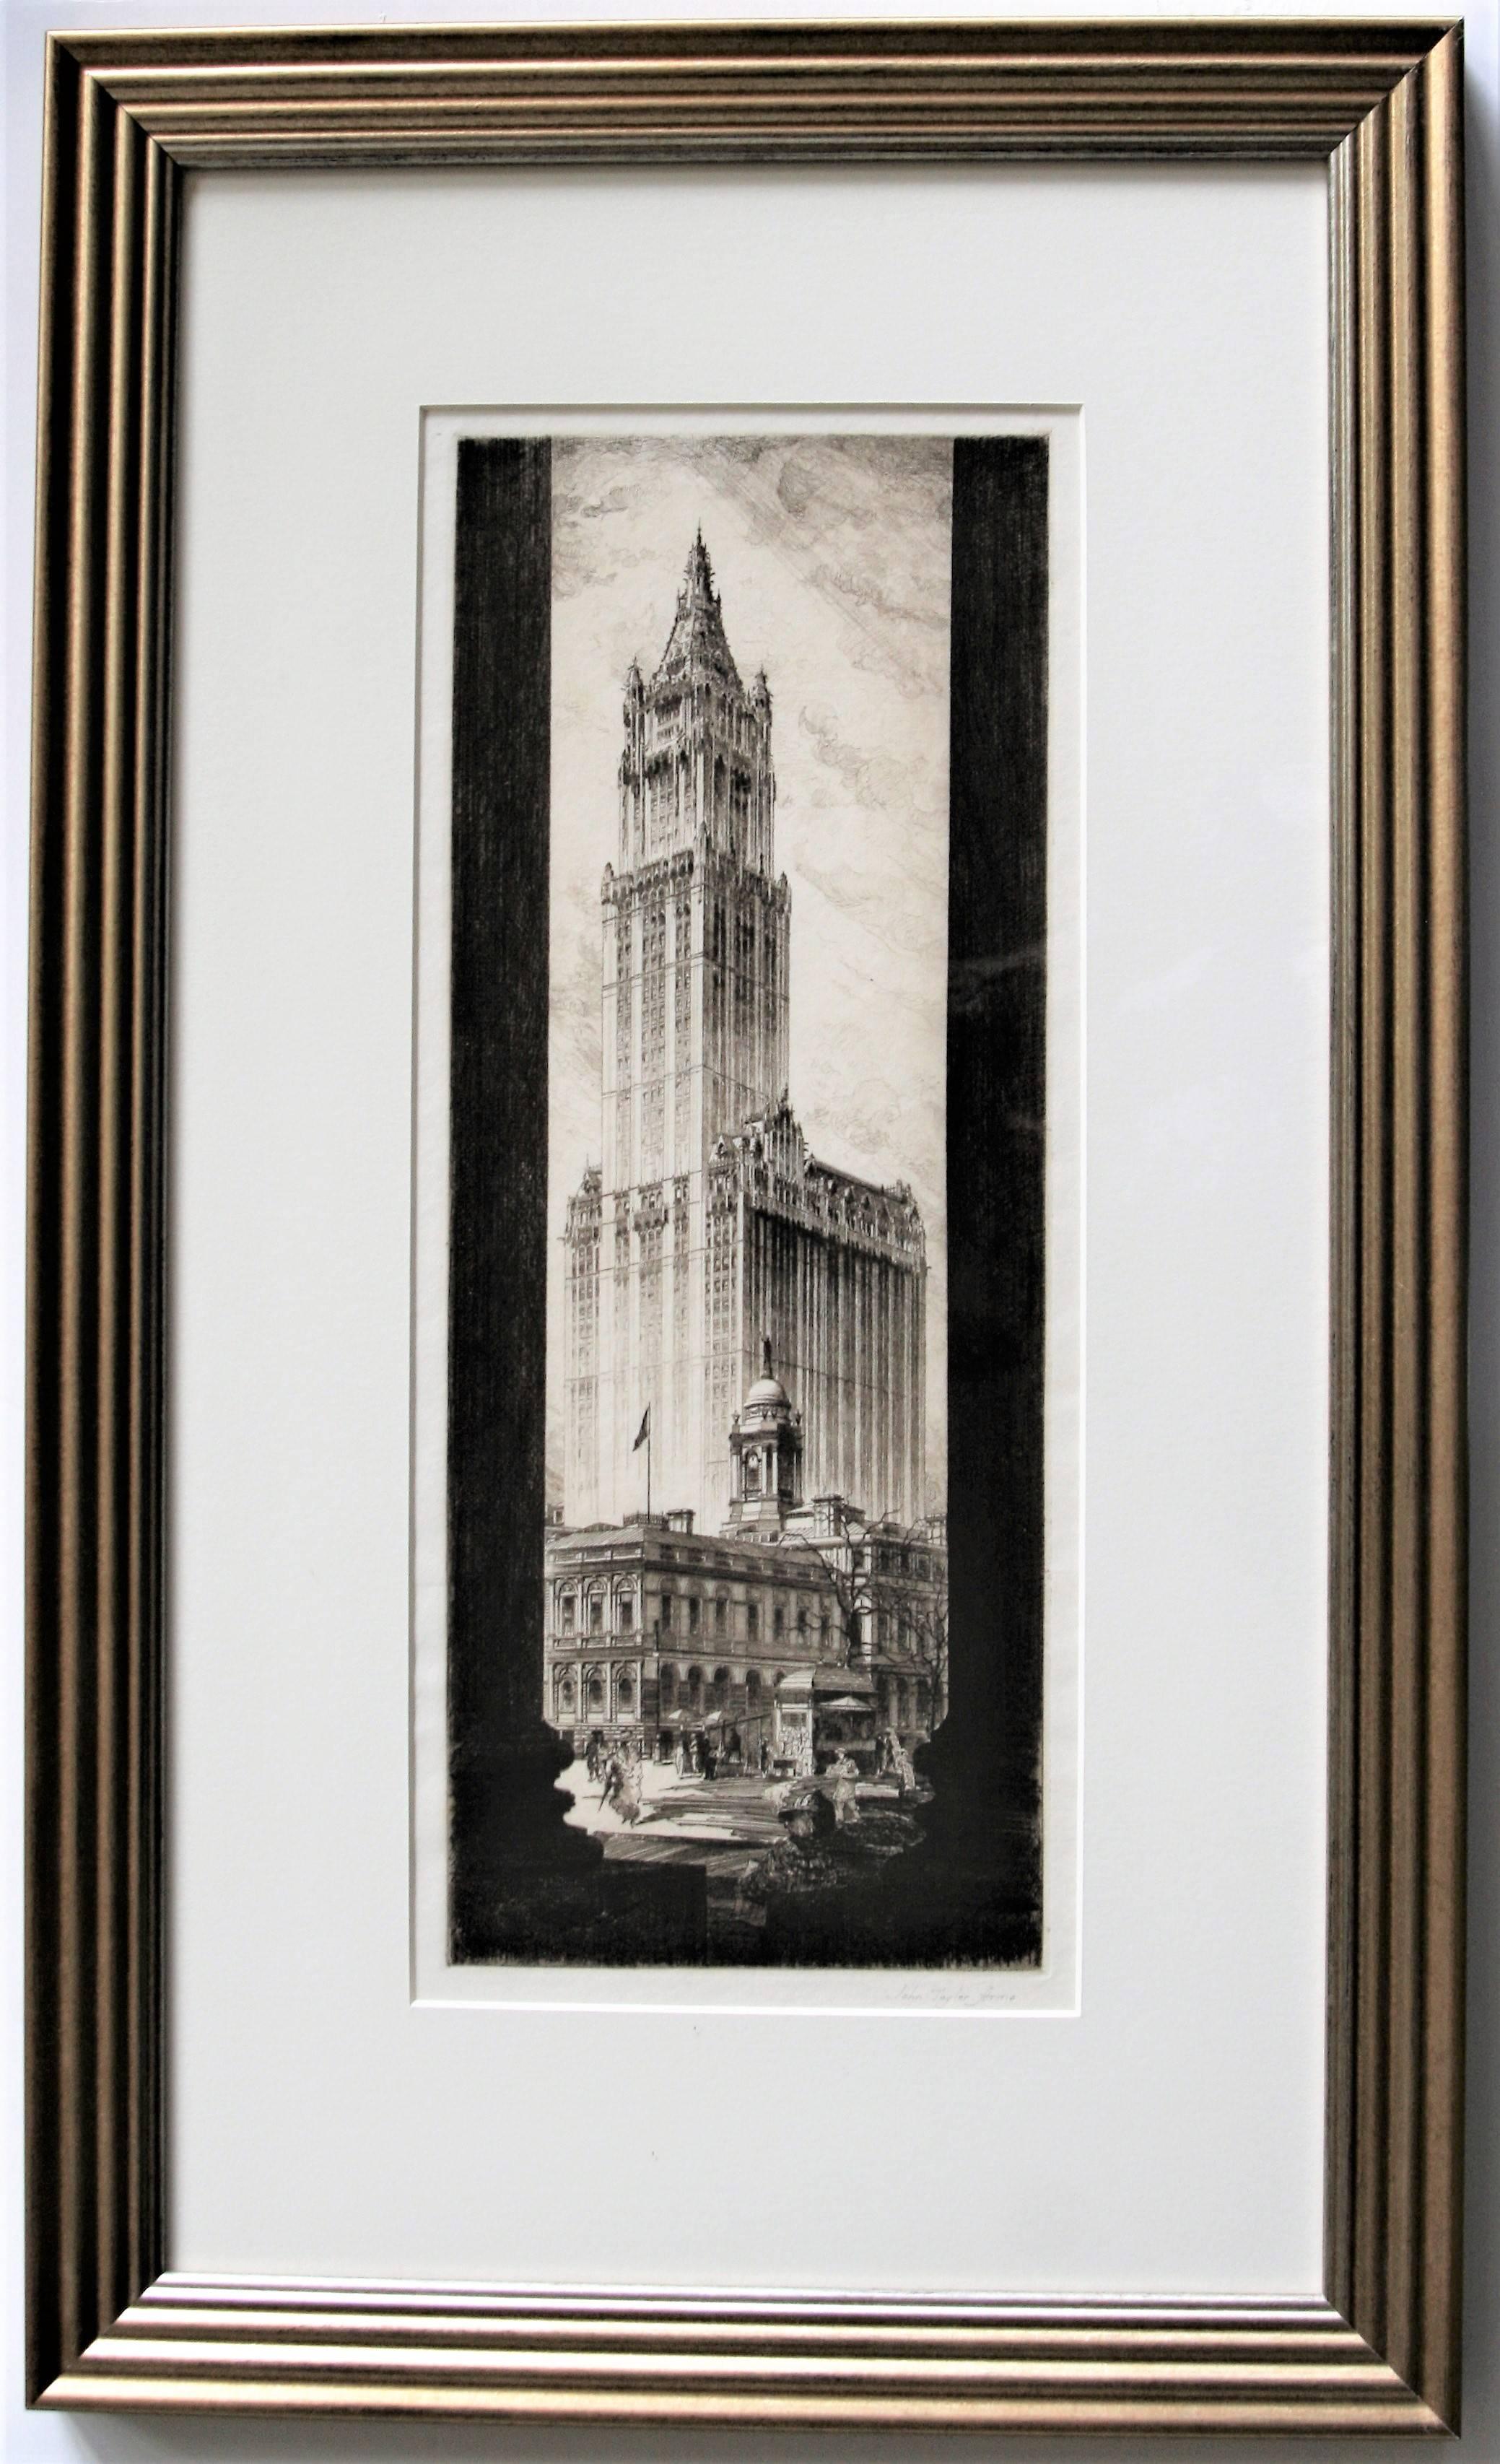 John Taylor Arms Abstract Print - American Cathedral (The Woolworth Building).